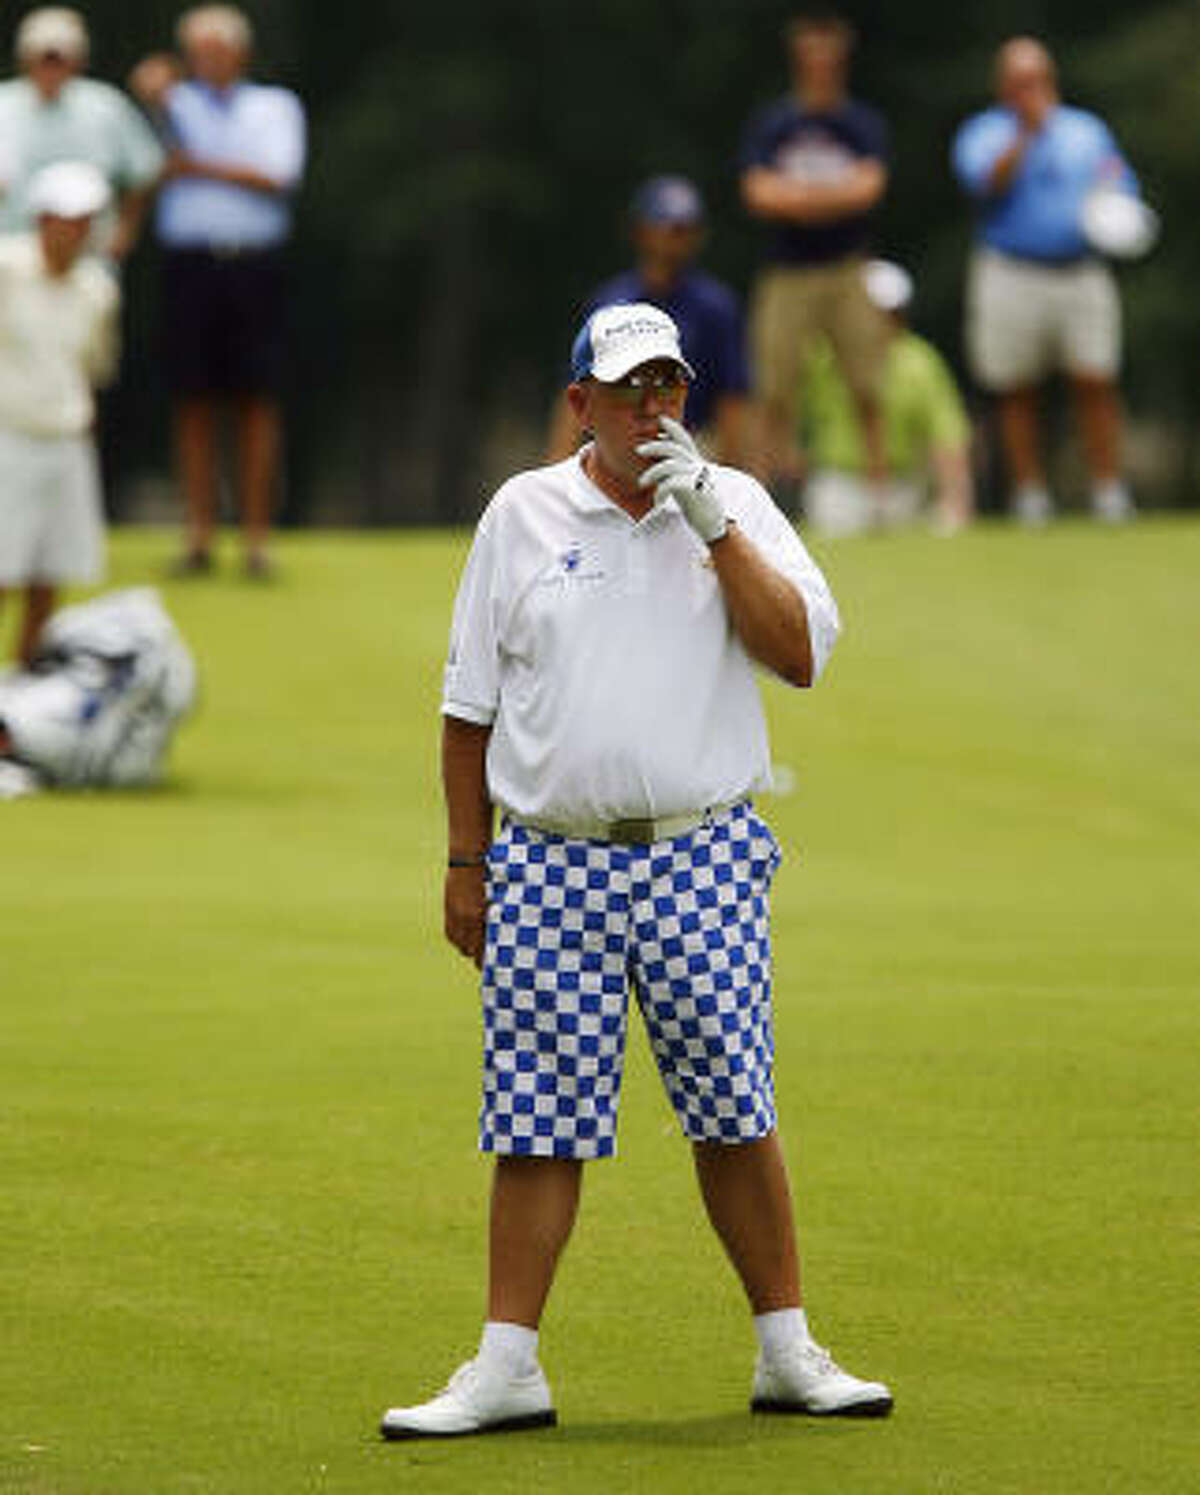 John Daly managed only four birdies over 36 holes of a U.S. Open qualifier, missing one of the 13 spots.